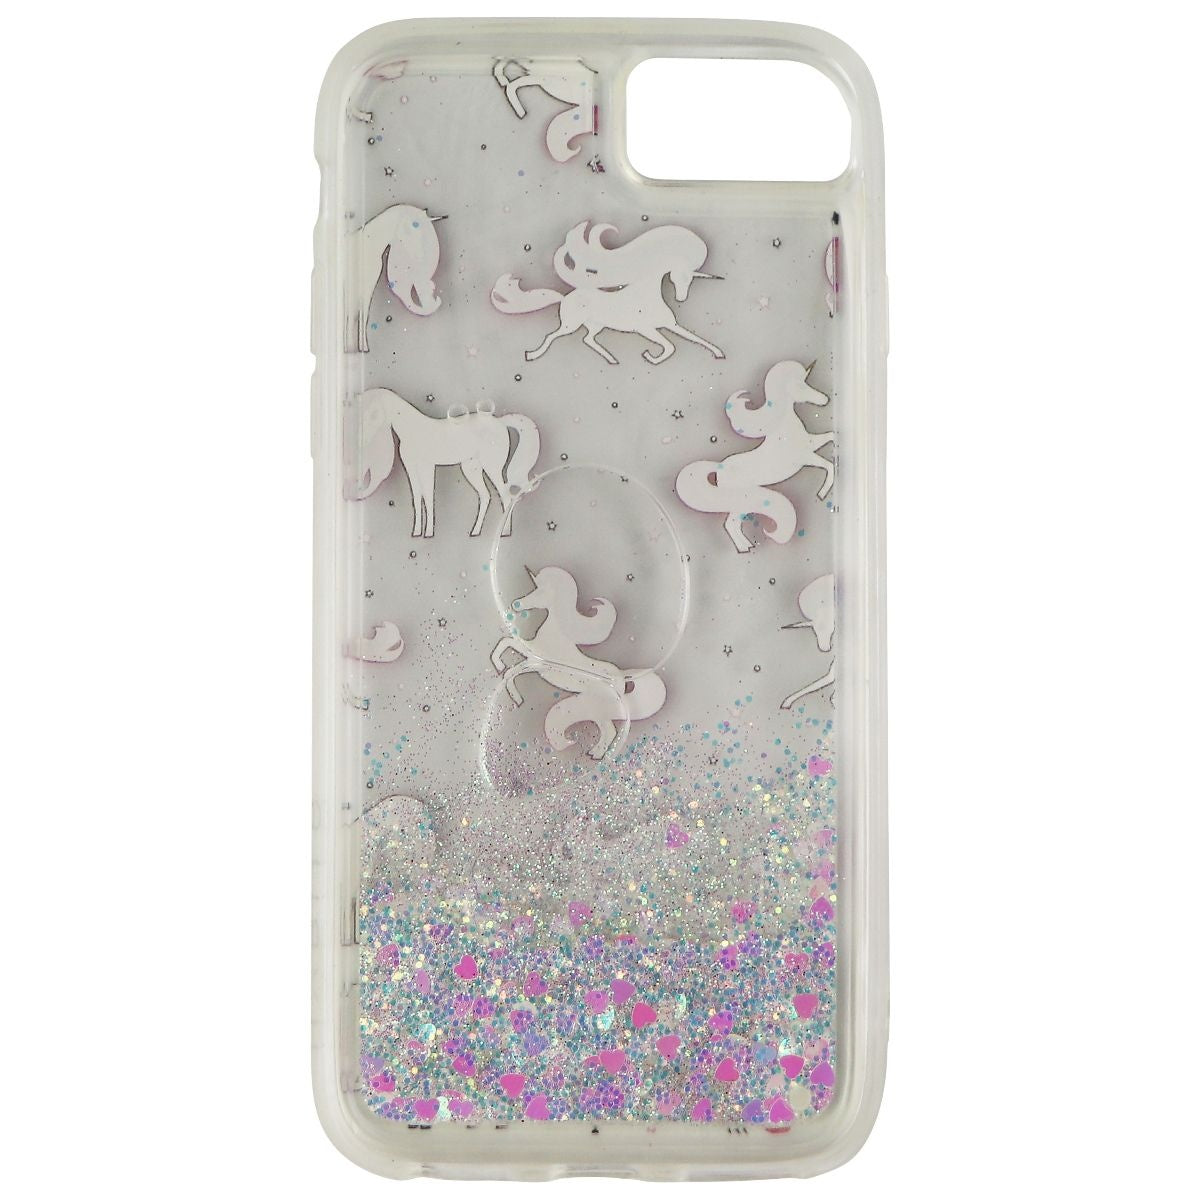 Habitu Shell Case for Apple iPhone 8 / 7 / 6s / 6 Smartphones - Glitter Unicorn Cell Phone - Cases, Covers & Skins Habitu    - Simple Cell Bulk Wholesale Pricing - USA Seller